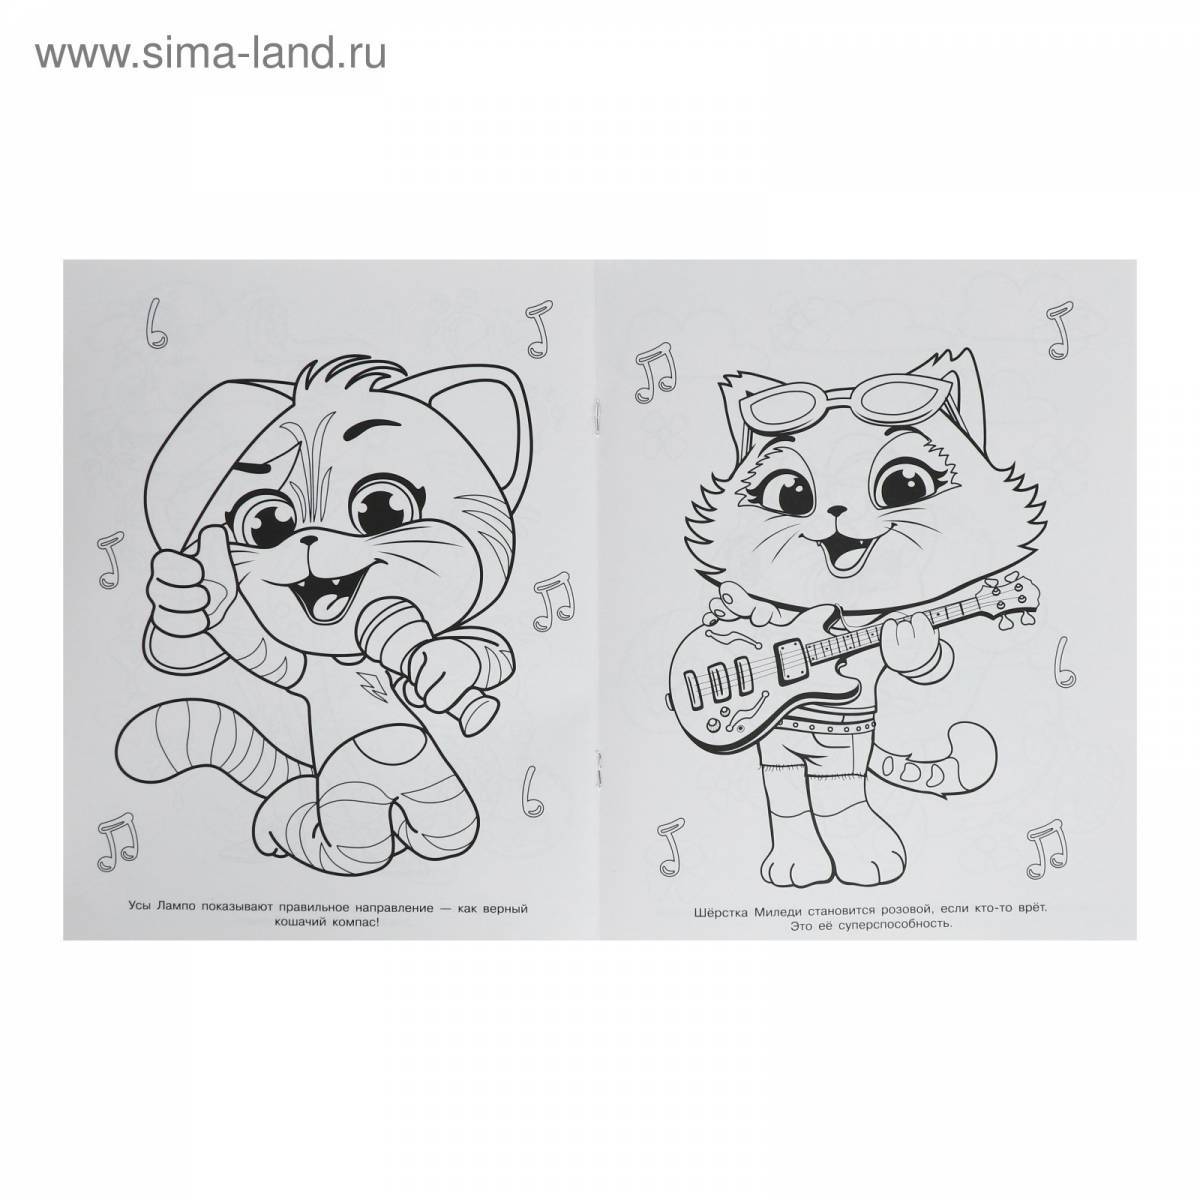 Snuggly kittens coloring page